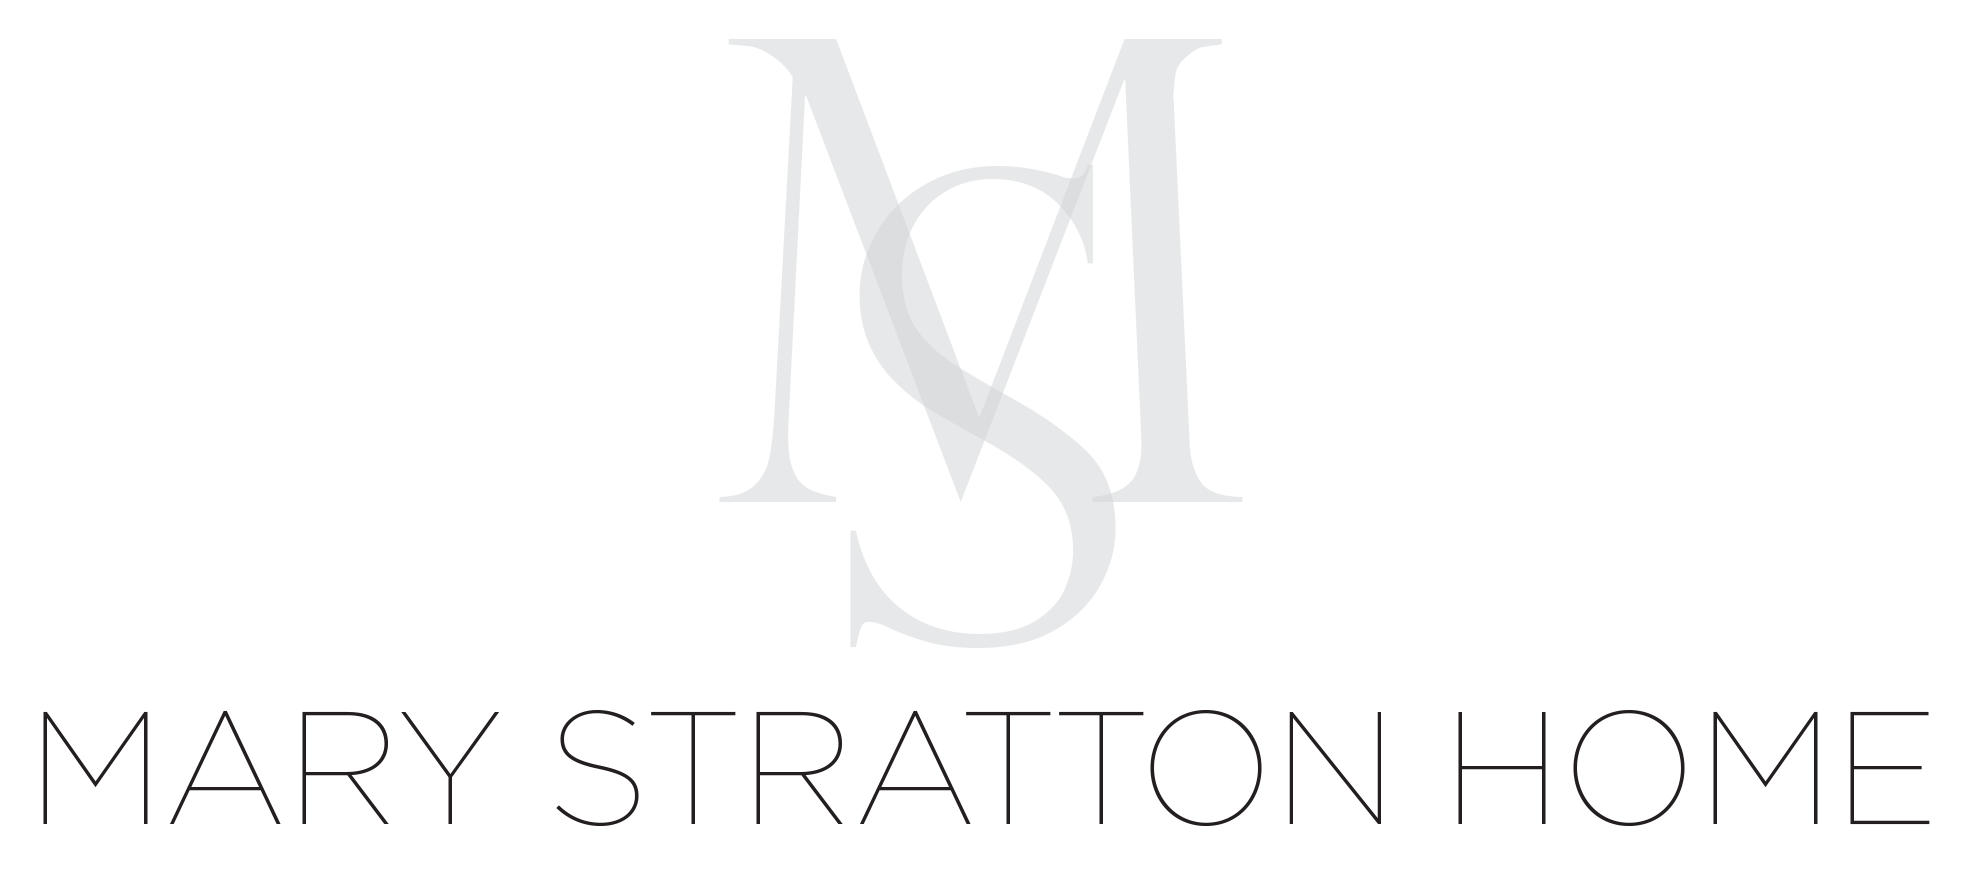 Mary Stratton Home